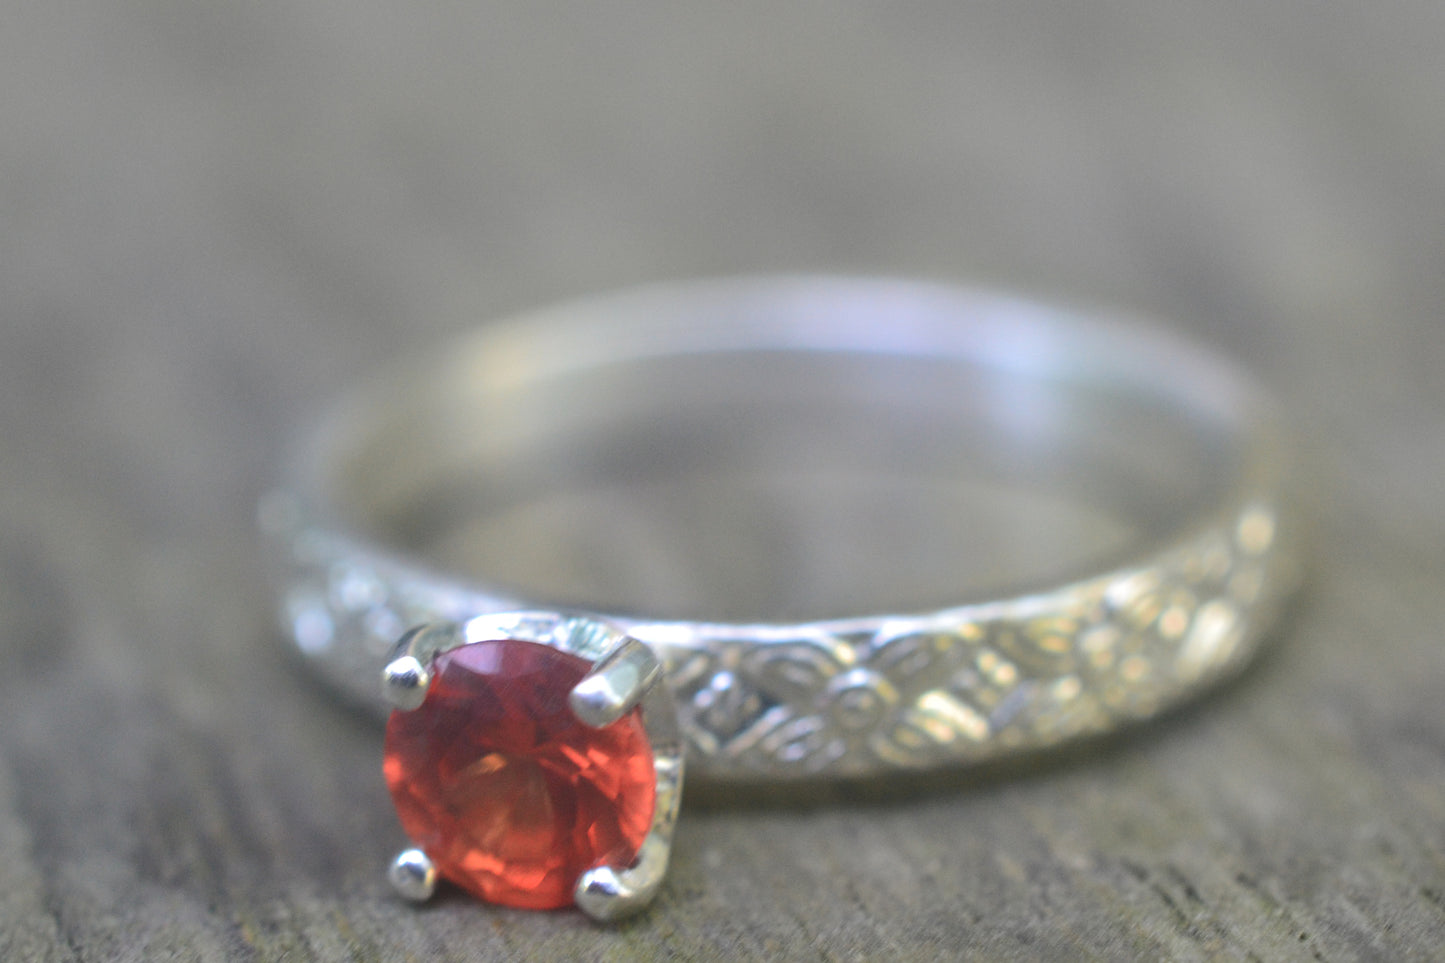 5mm Orange Sapphire Solitaire Ring in Silver